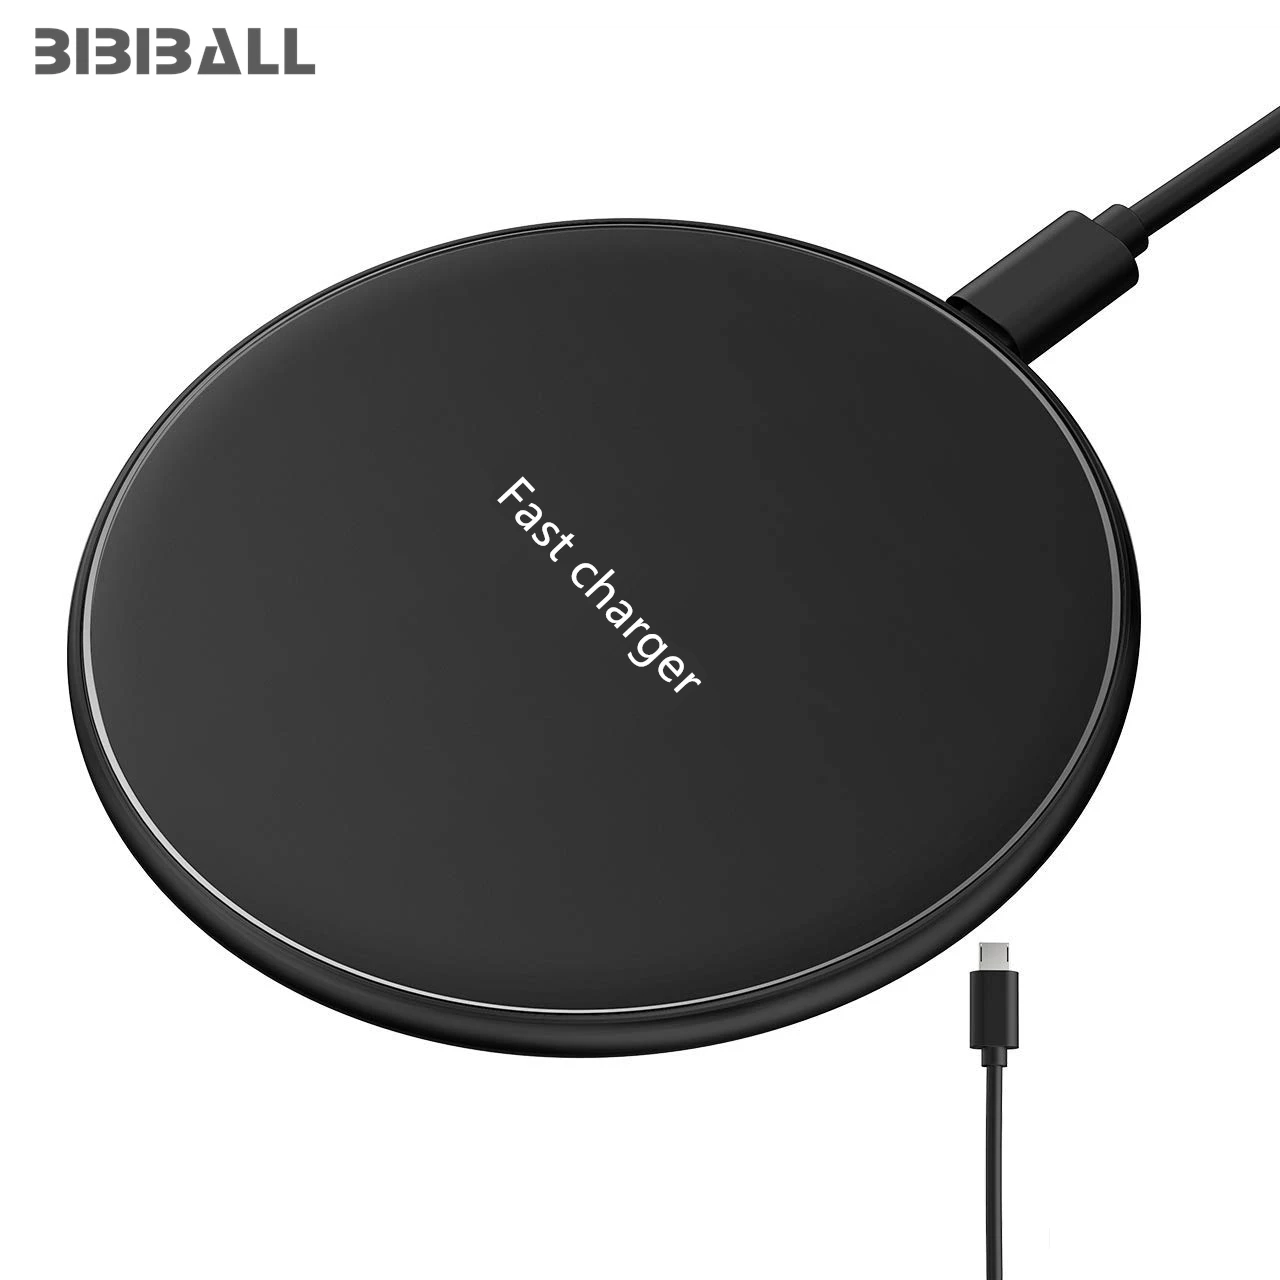 

Wireless Charger for IPhone X 8 Samsung Note8 S9 S8 UMiDiGi ONE Pro / UMiDiGi Z2 Pro 10W Qi Wireless Charging Fast Charger Pad